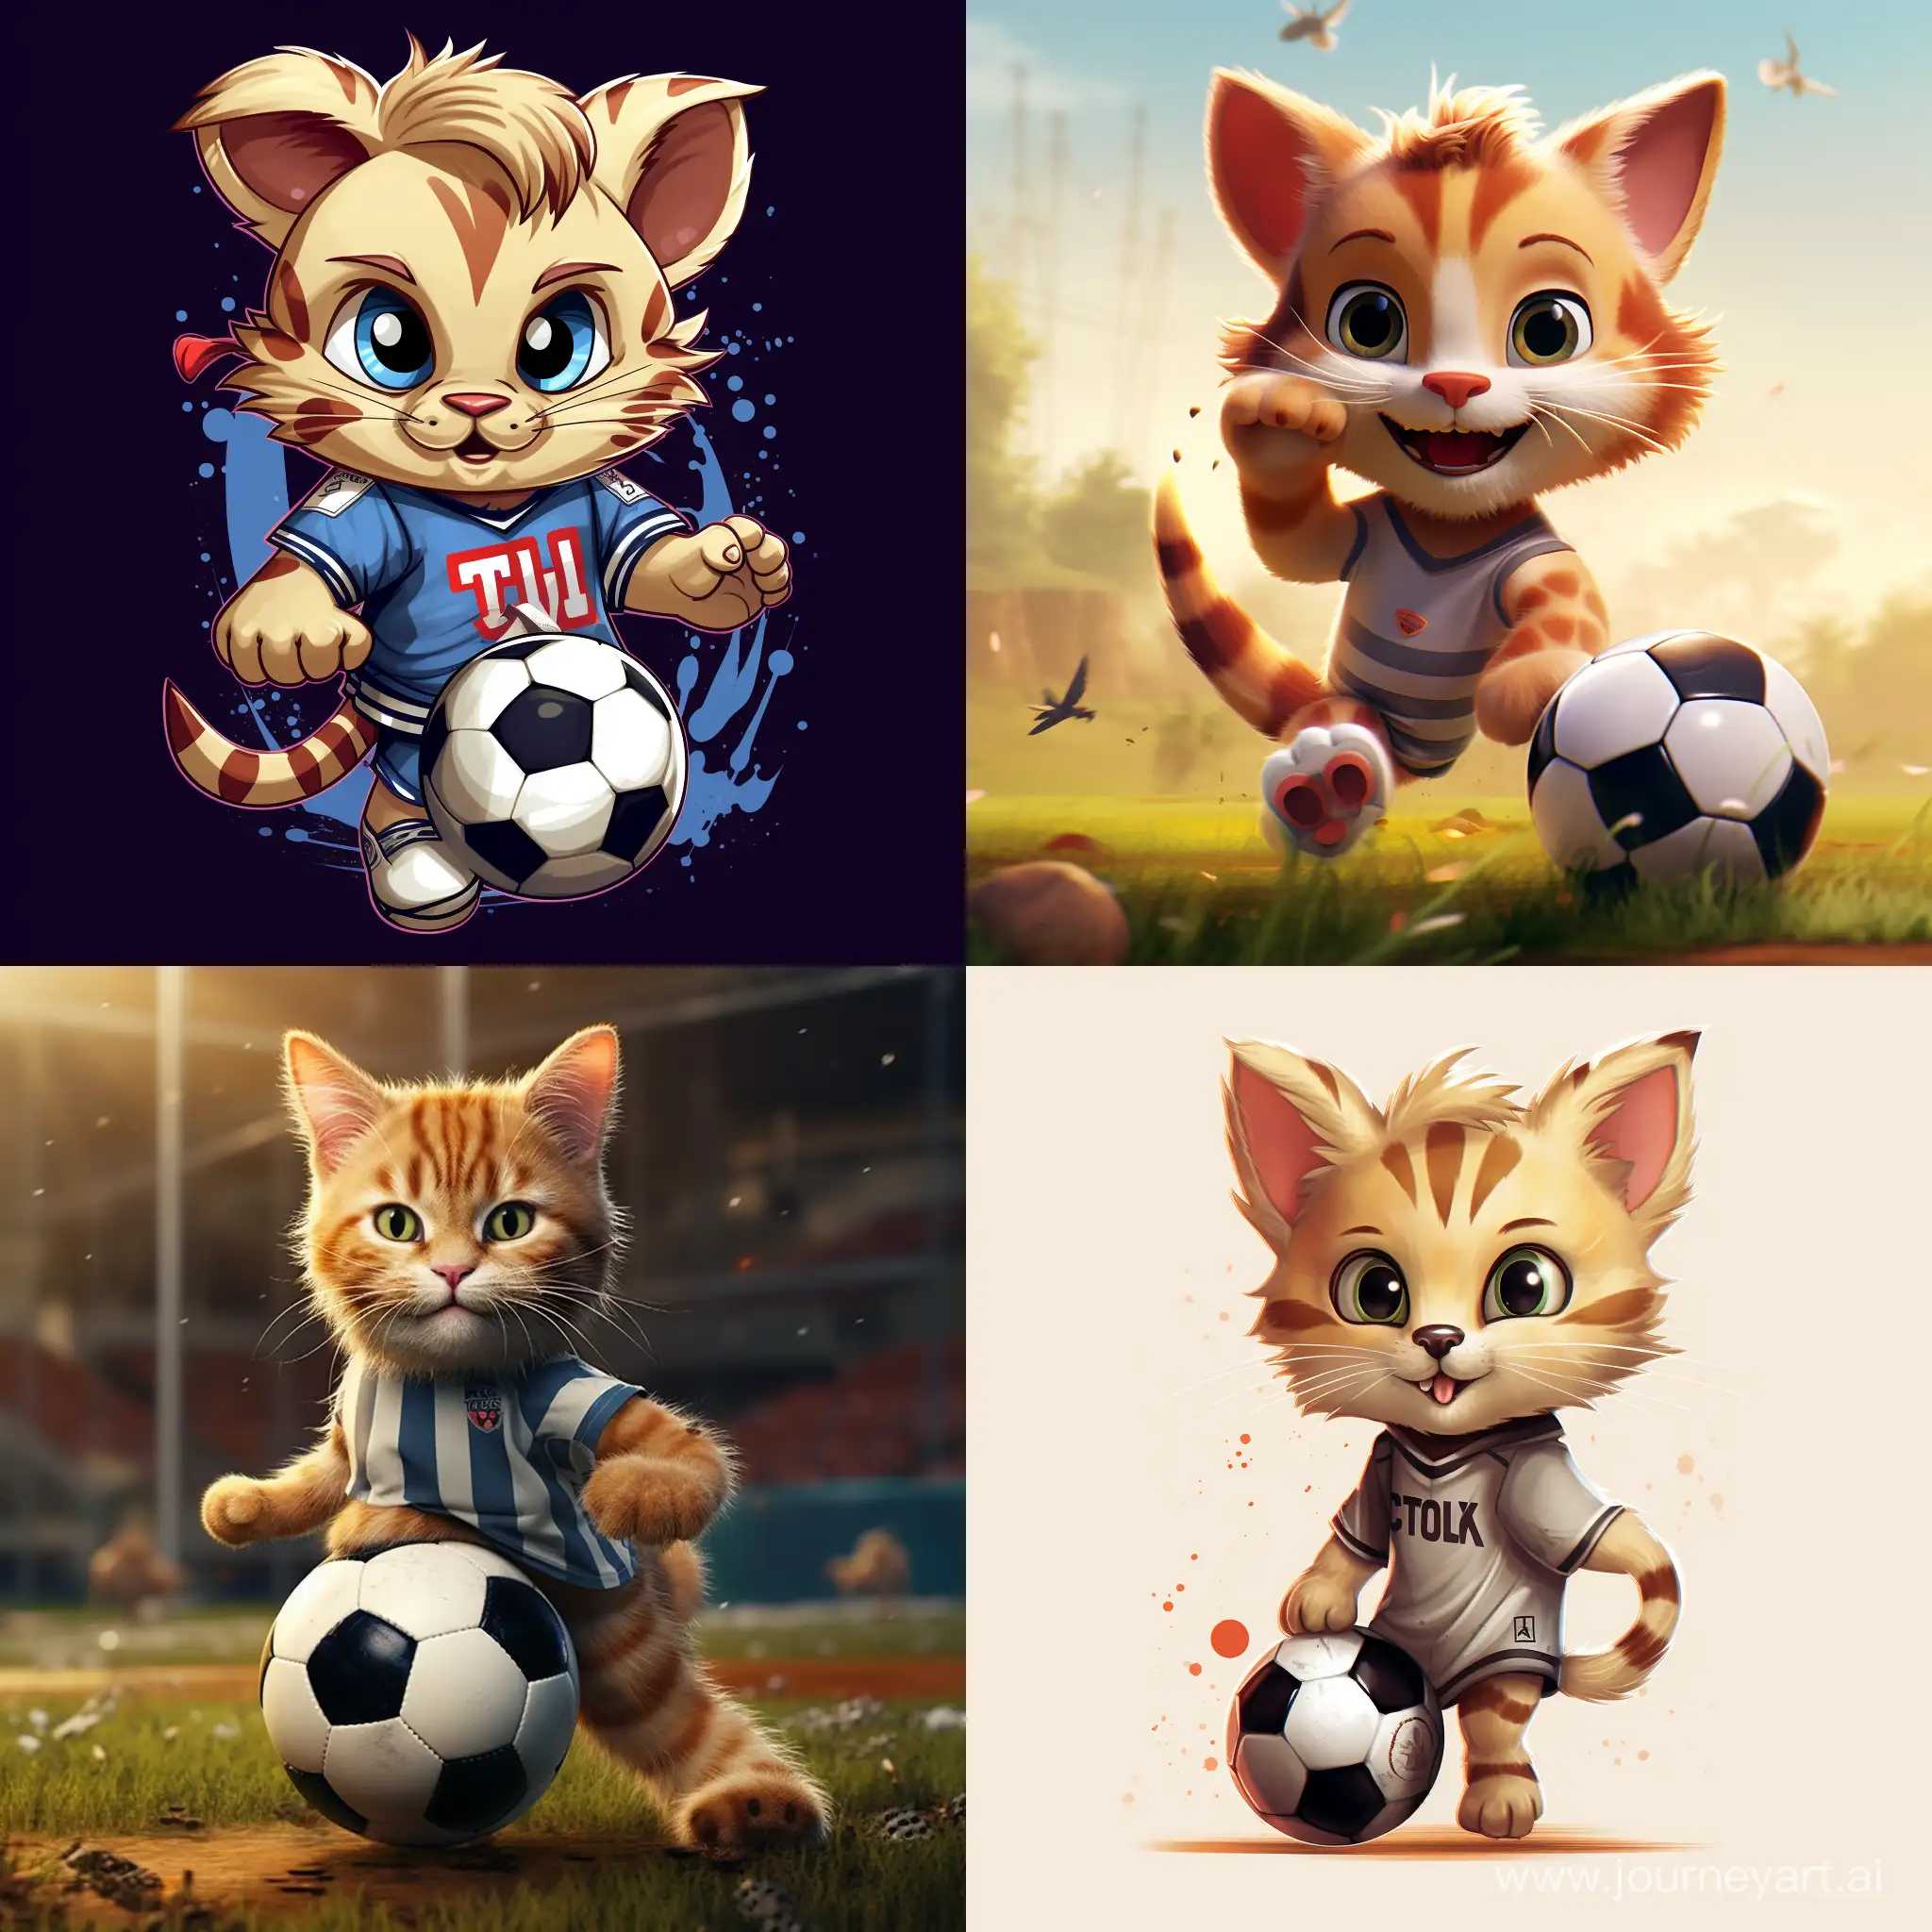 Playful-Cat-Playing-Soccer-in-a-Square-Aspect-Ratio-Image